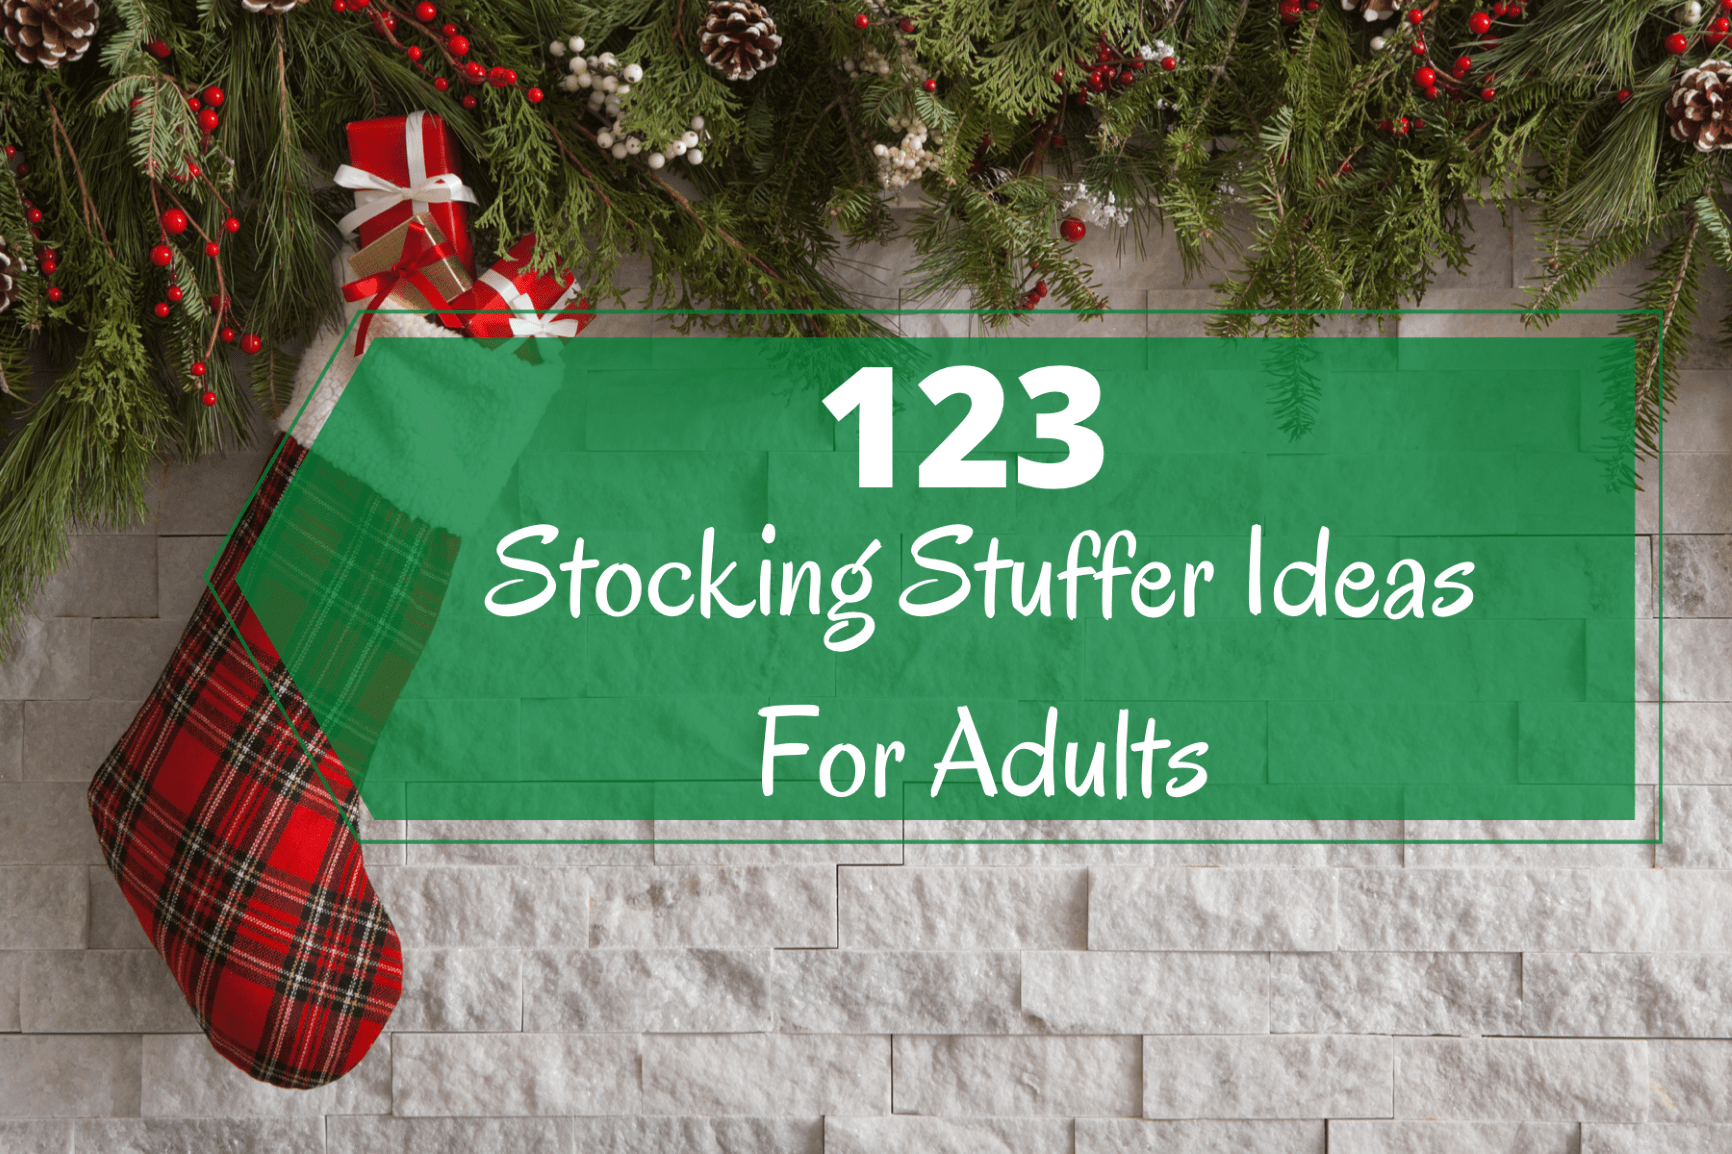 The complete list of 123 stocking stuffers for adults - Boomer Eco